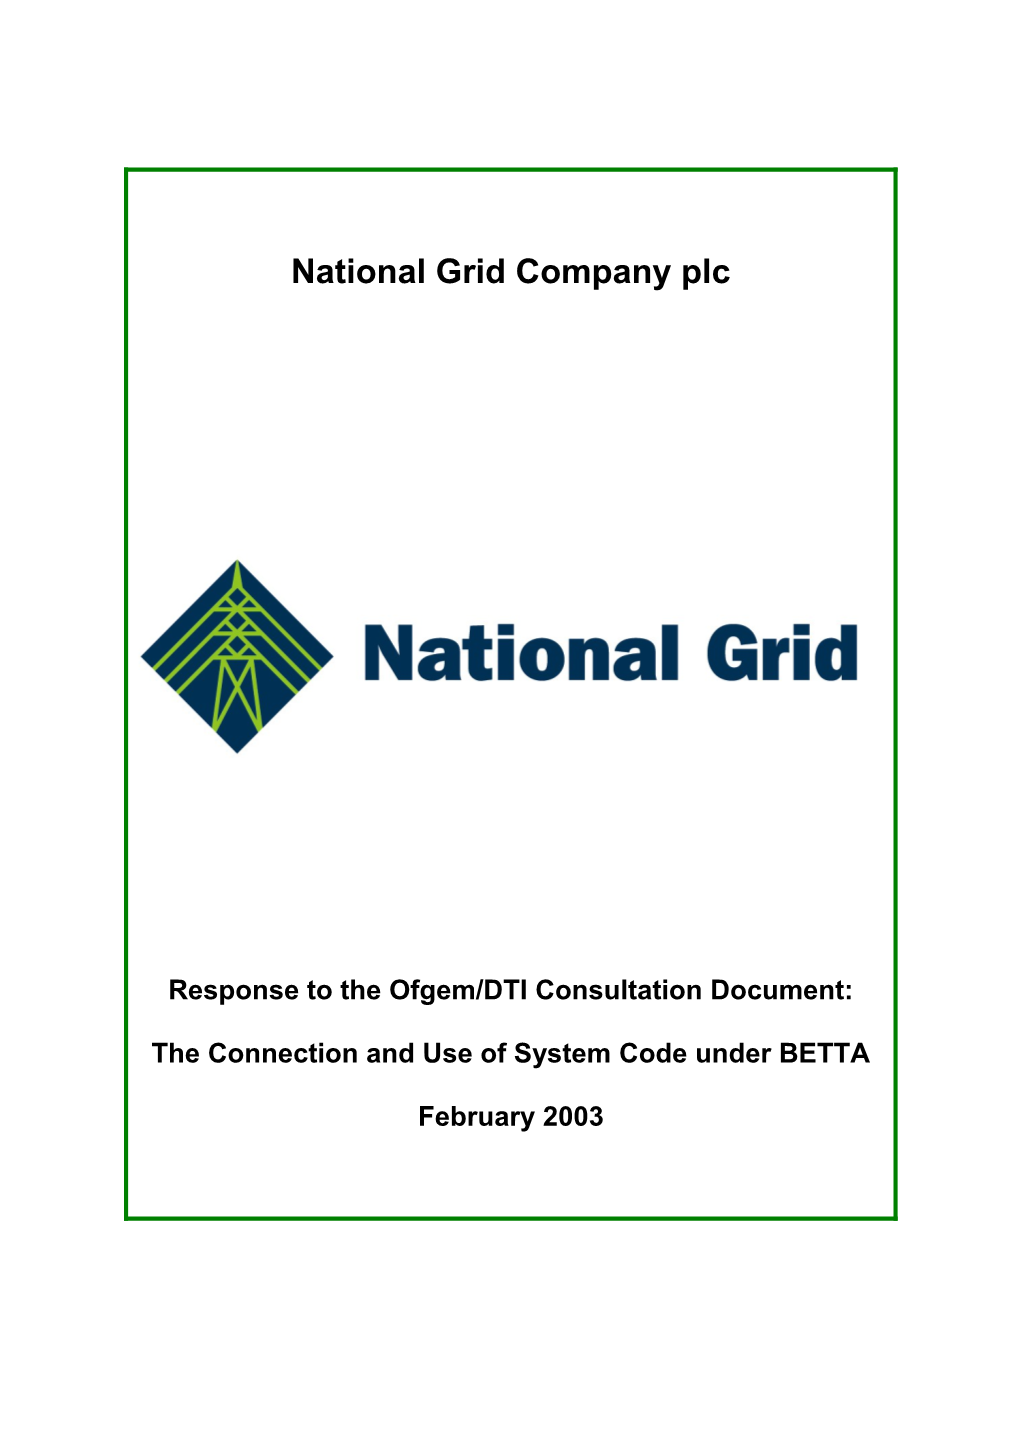 NGC Response -The Connection & Use of System Code Under BETTA Ofgem/DTI Consultation On